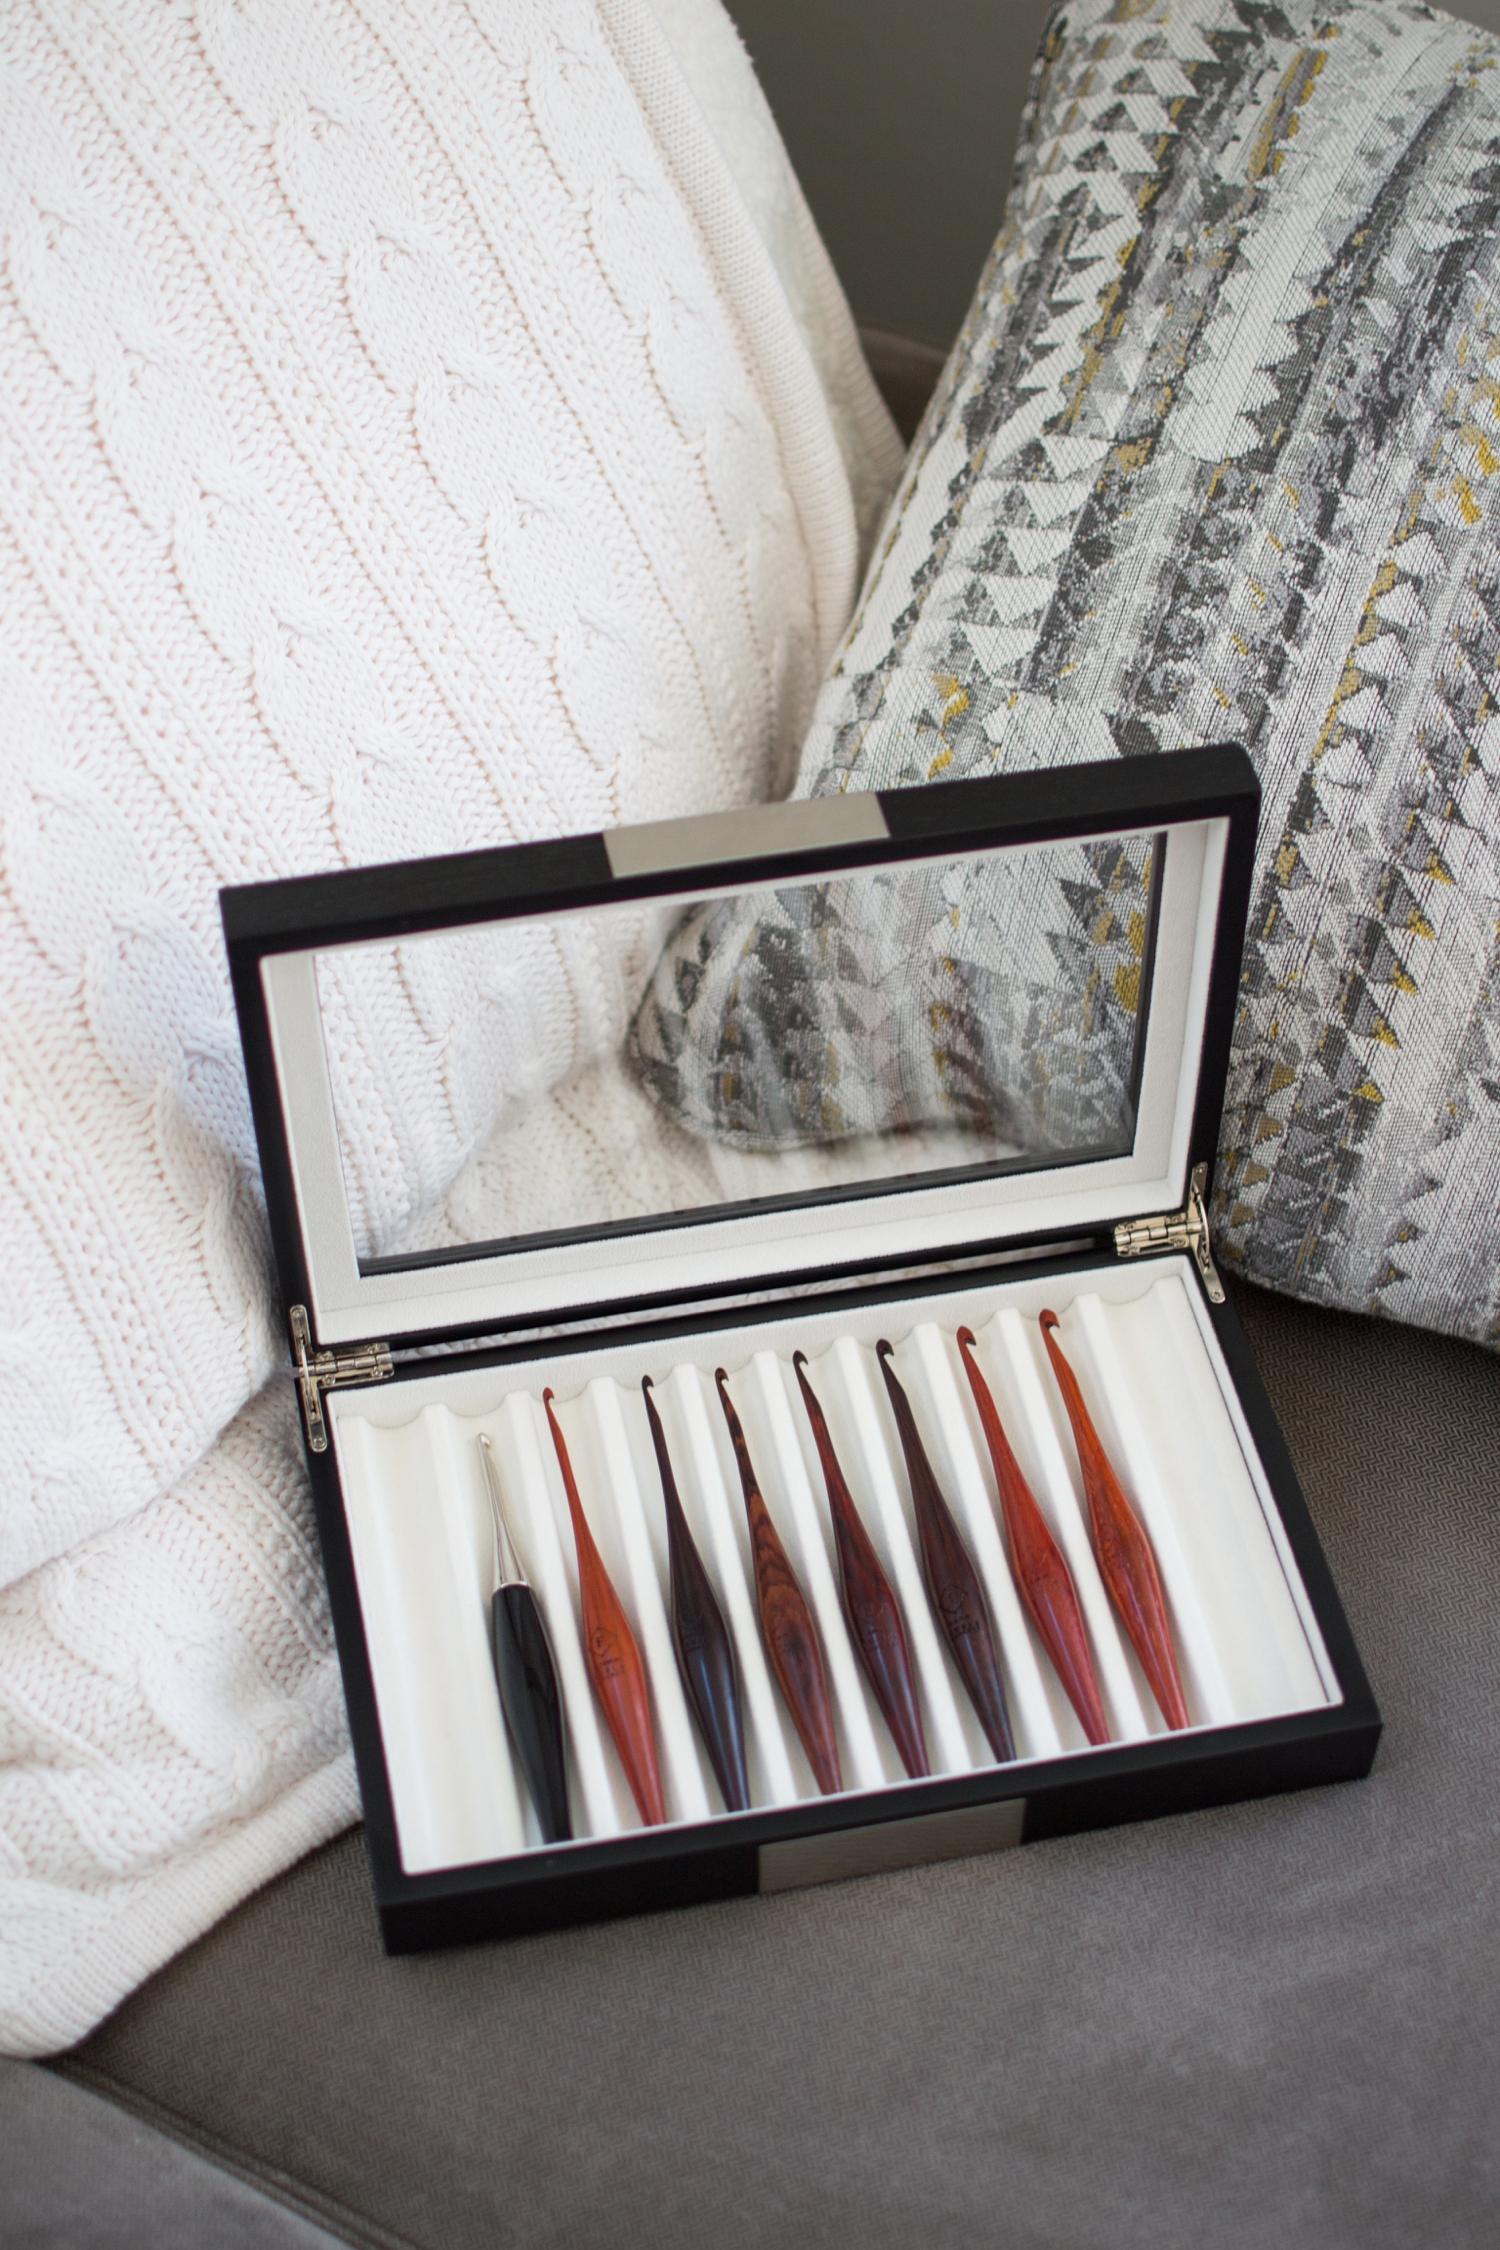 My Furls Crochet Hooks & Collector's Box - Woods and Wool